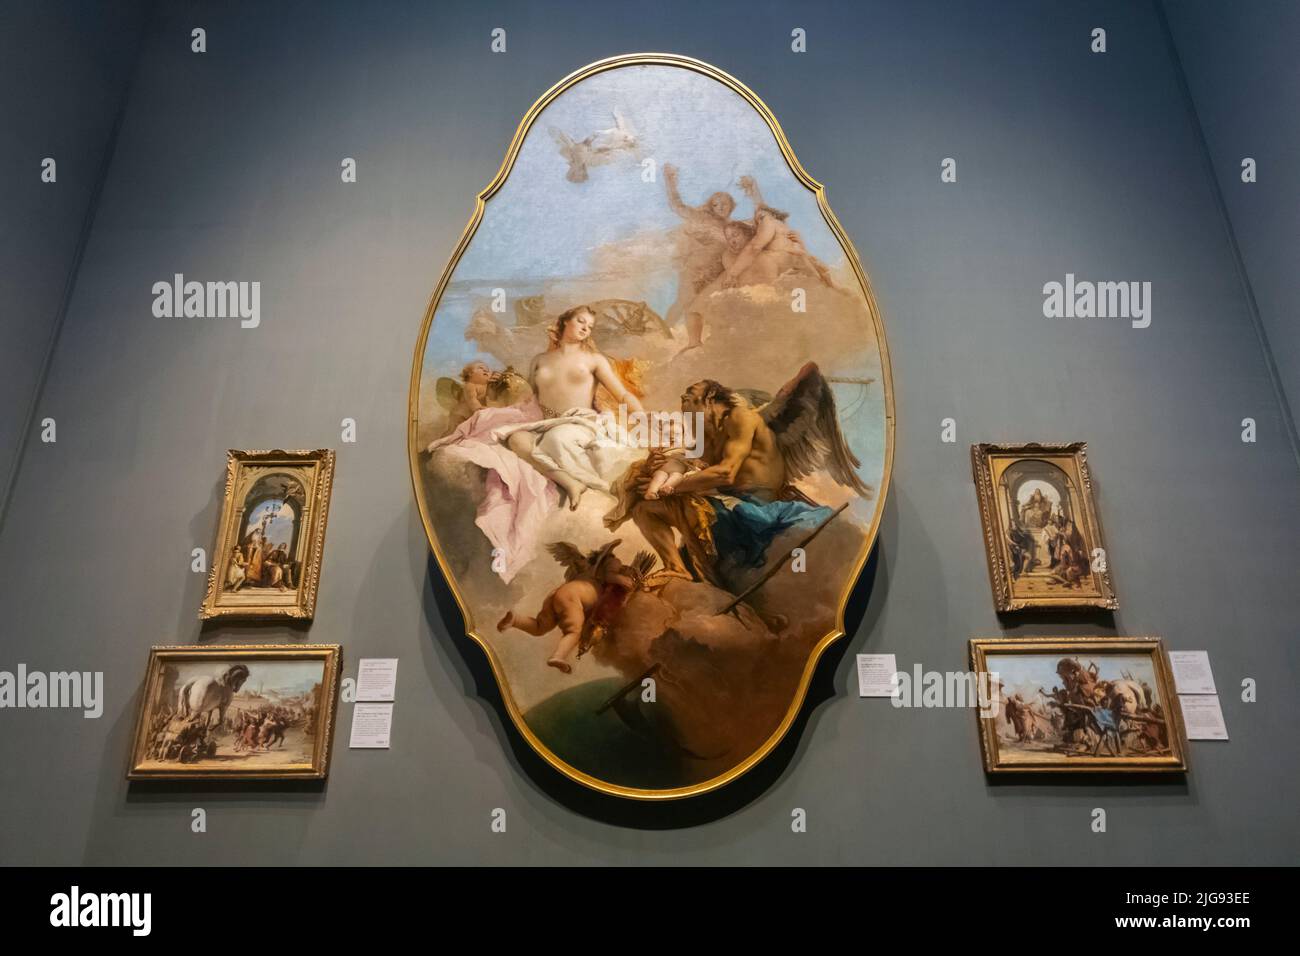 Painting titled 'An Allegory with Venus and Time' by Italian Artist Giovanni Battista Tiepolo dated 1754 Stock Photo